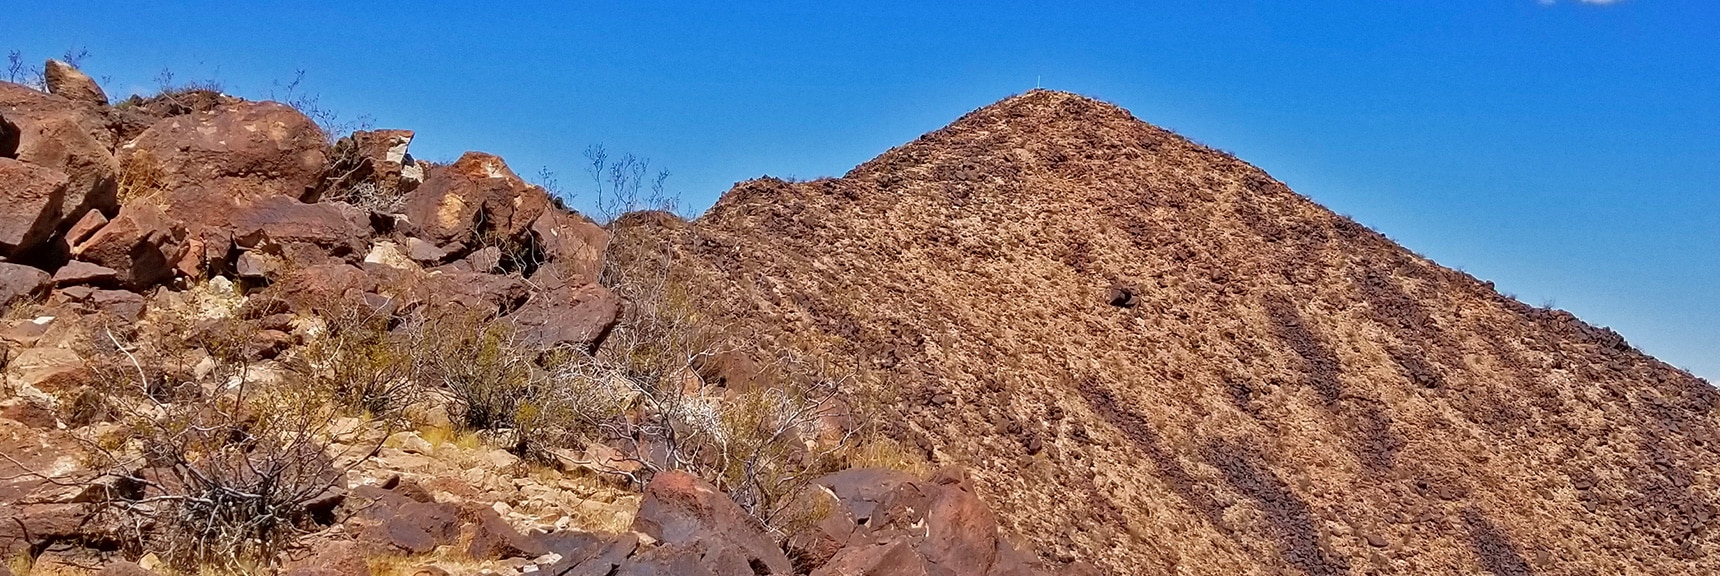 Summit Viewed from Part Way Down the South Ridge | Lava Butte | Lake Mead National Recreation Area, Nevada